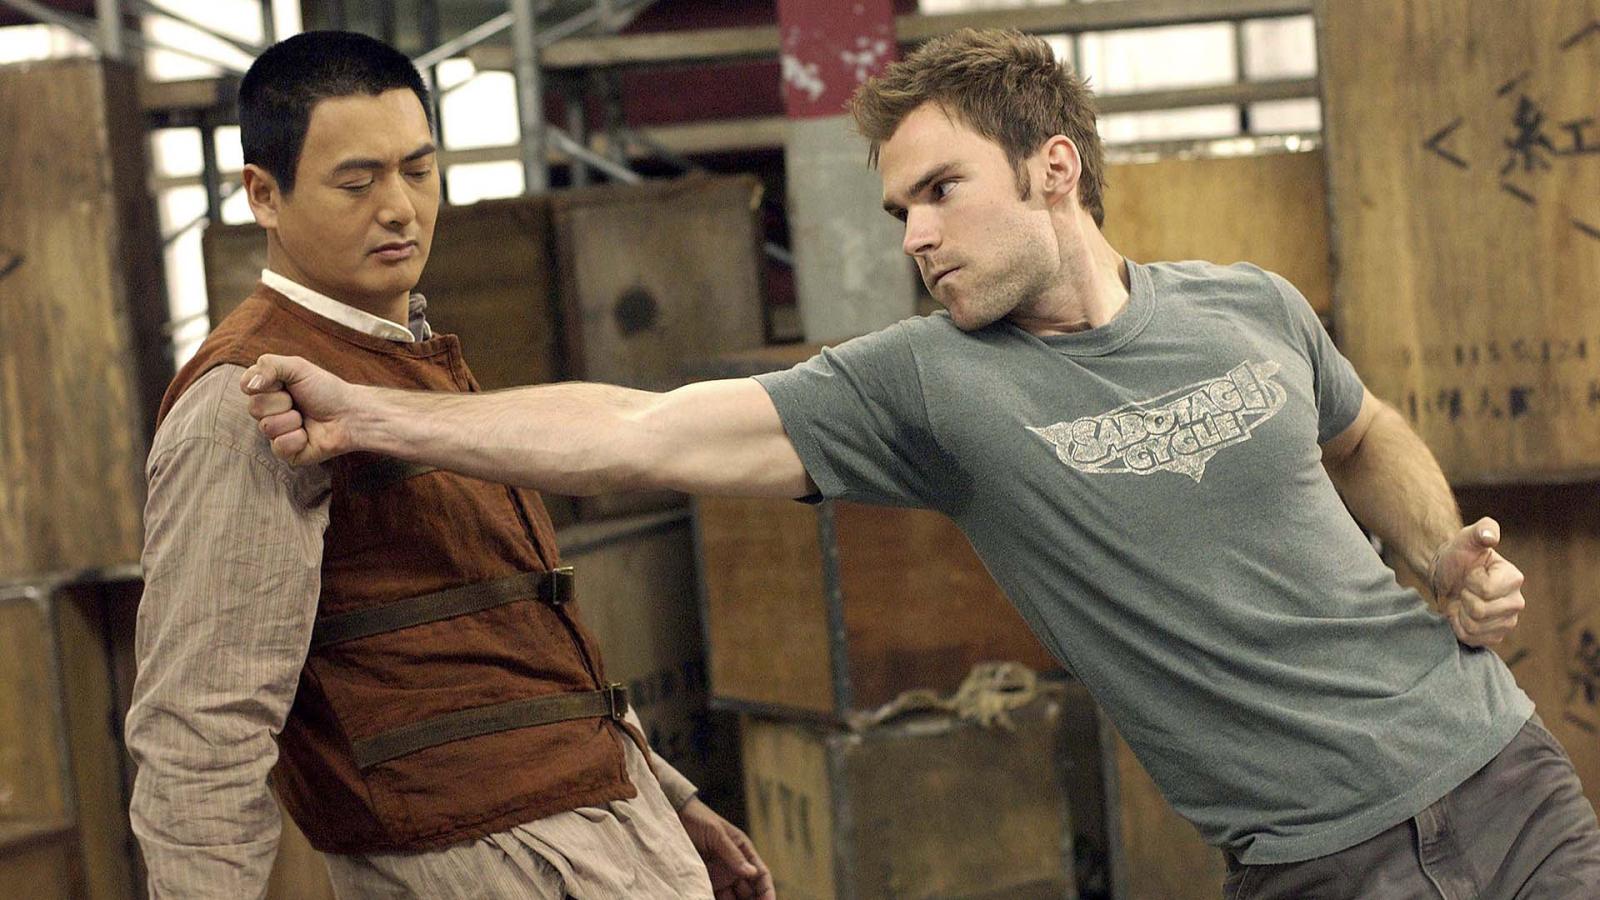 10 Action Comedies from the 2000s That Are Seriously Underrated - image 8